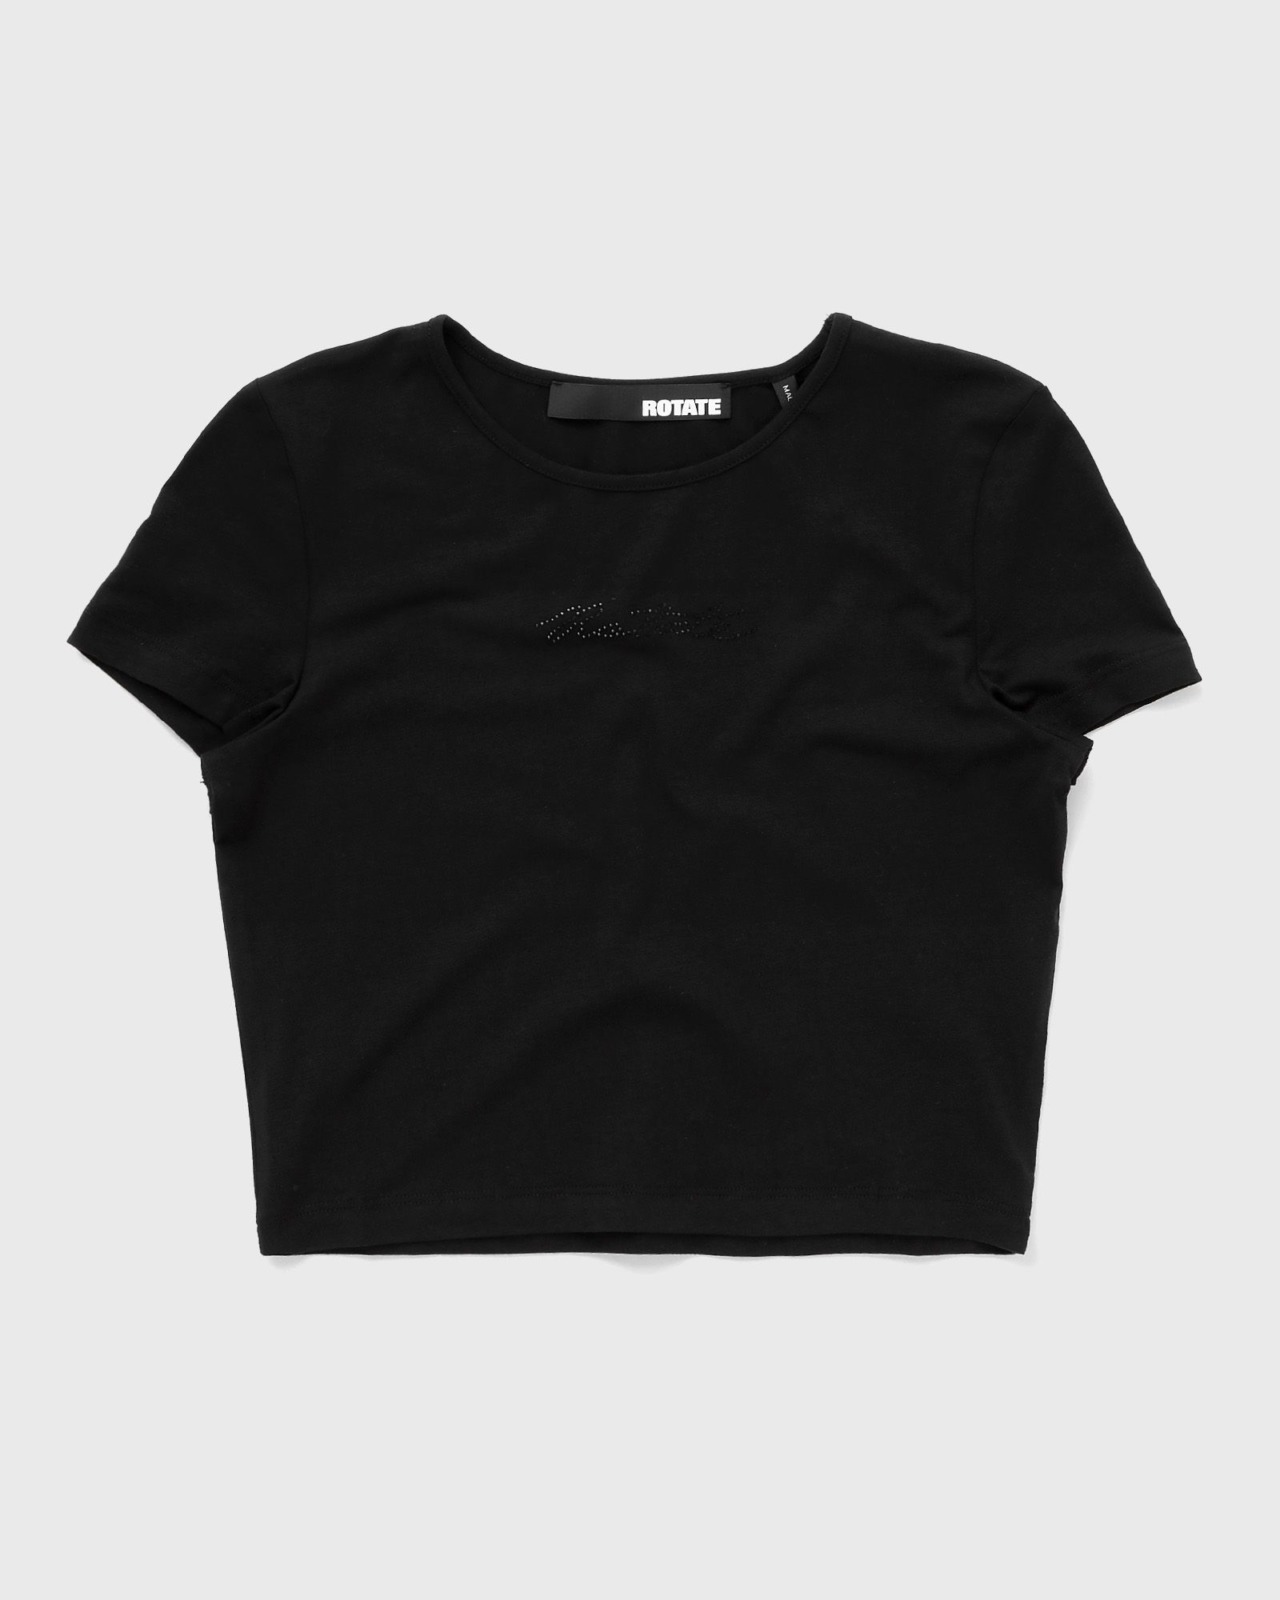 Rotate - Woman Shorts Black from Bstn GOOFASH